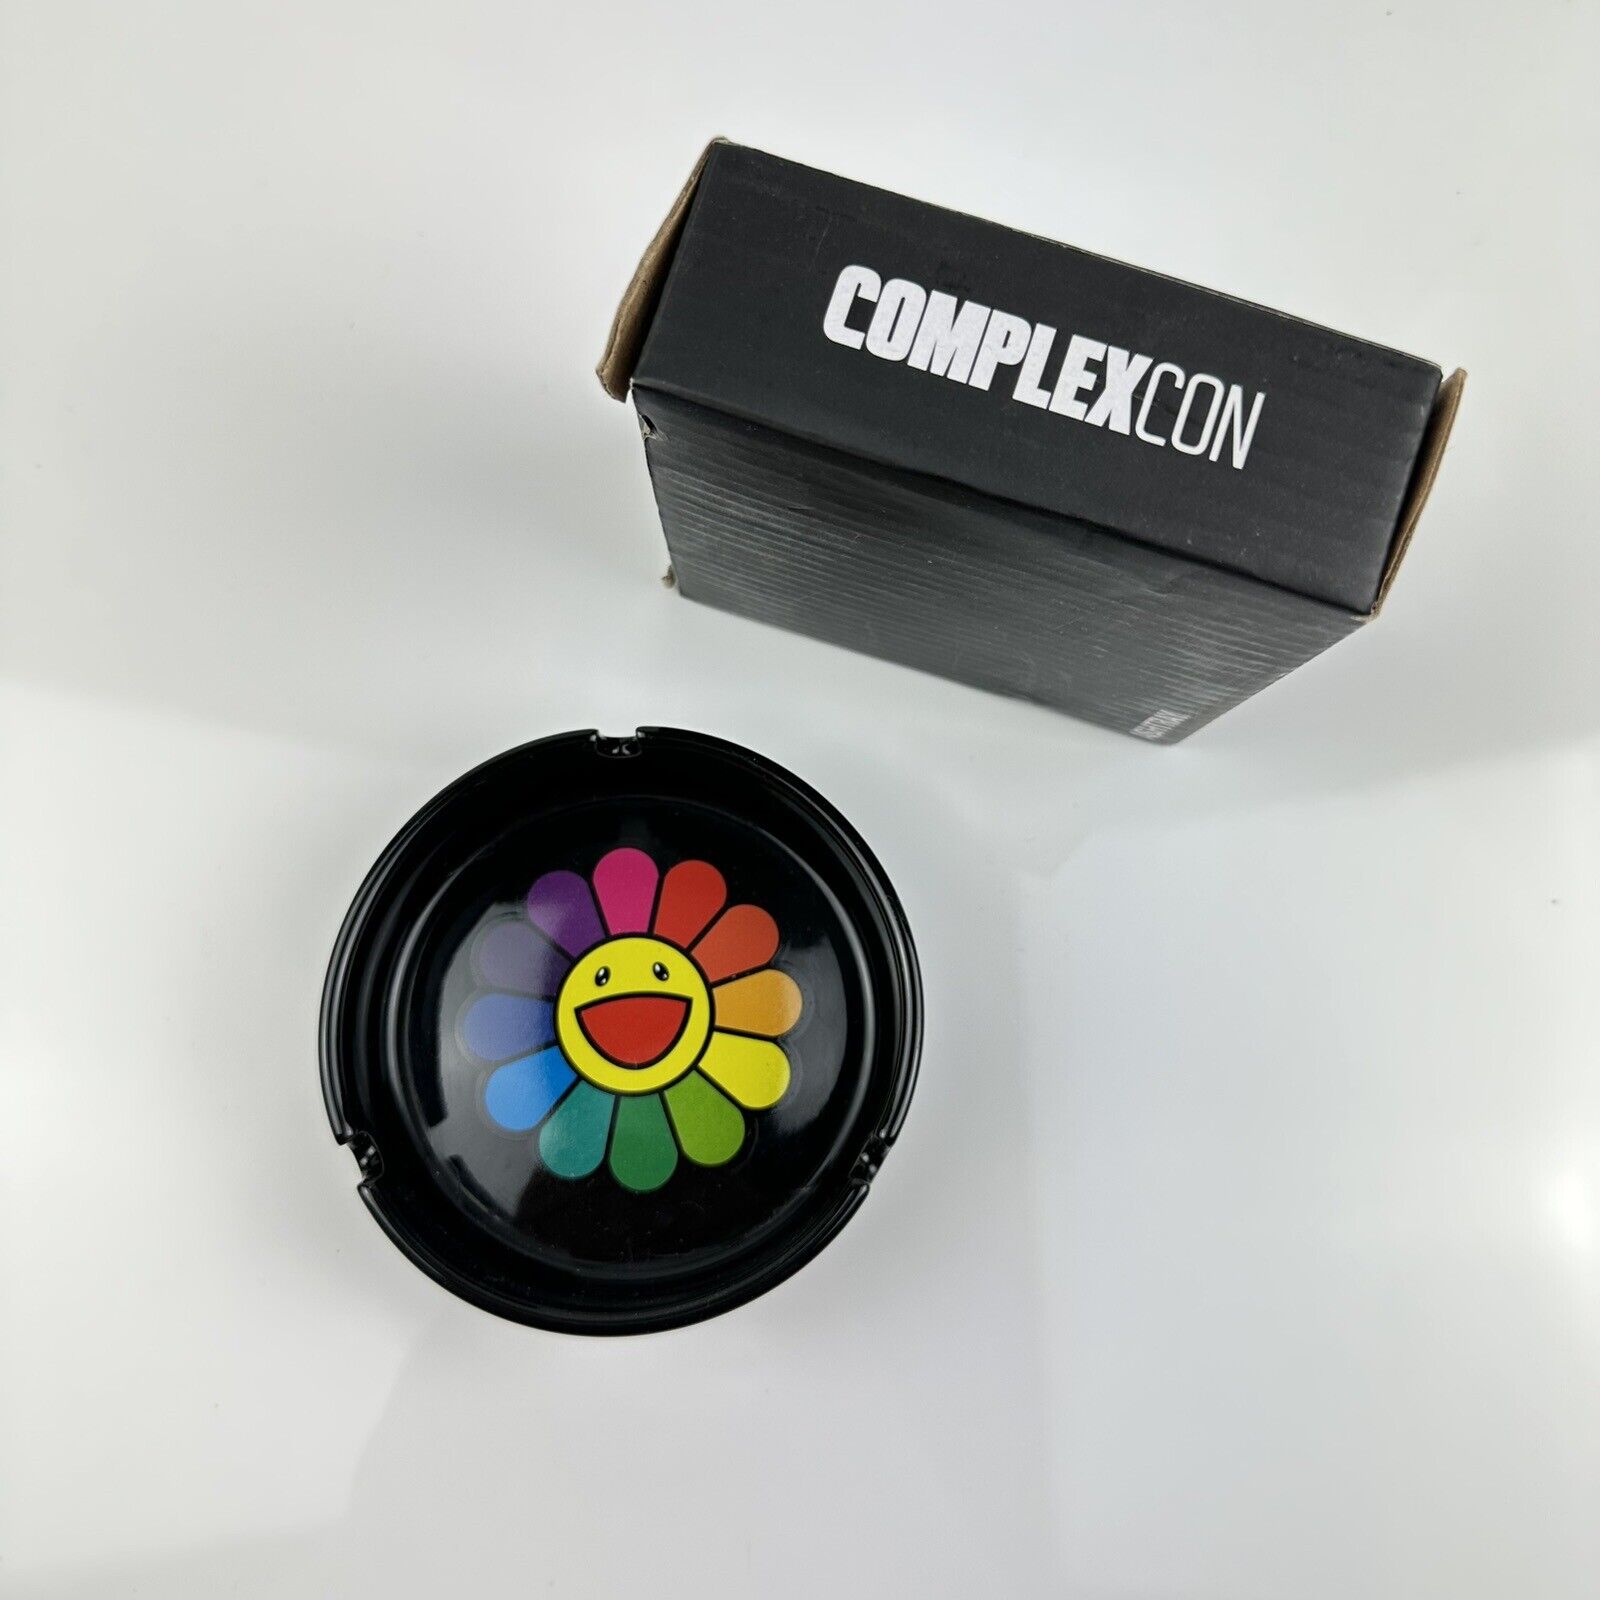 Exclusive Complexcon x Takashi Murakami Flower Ashtray (Limited) Sold Out Rare